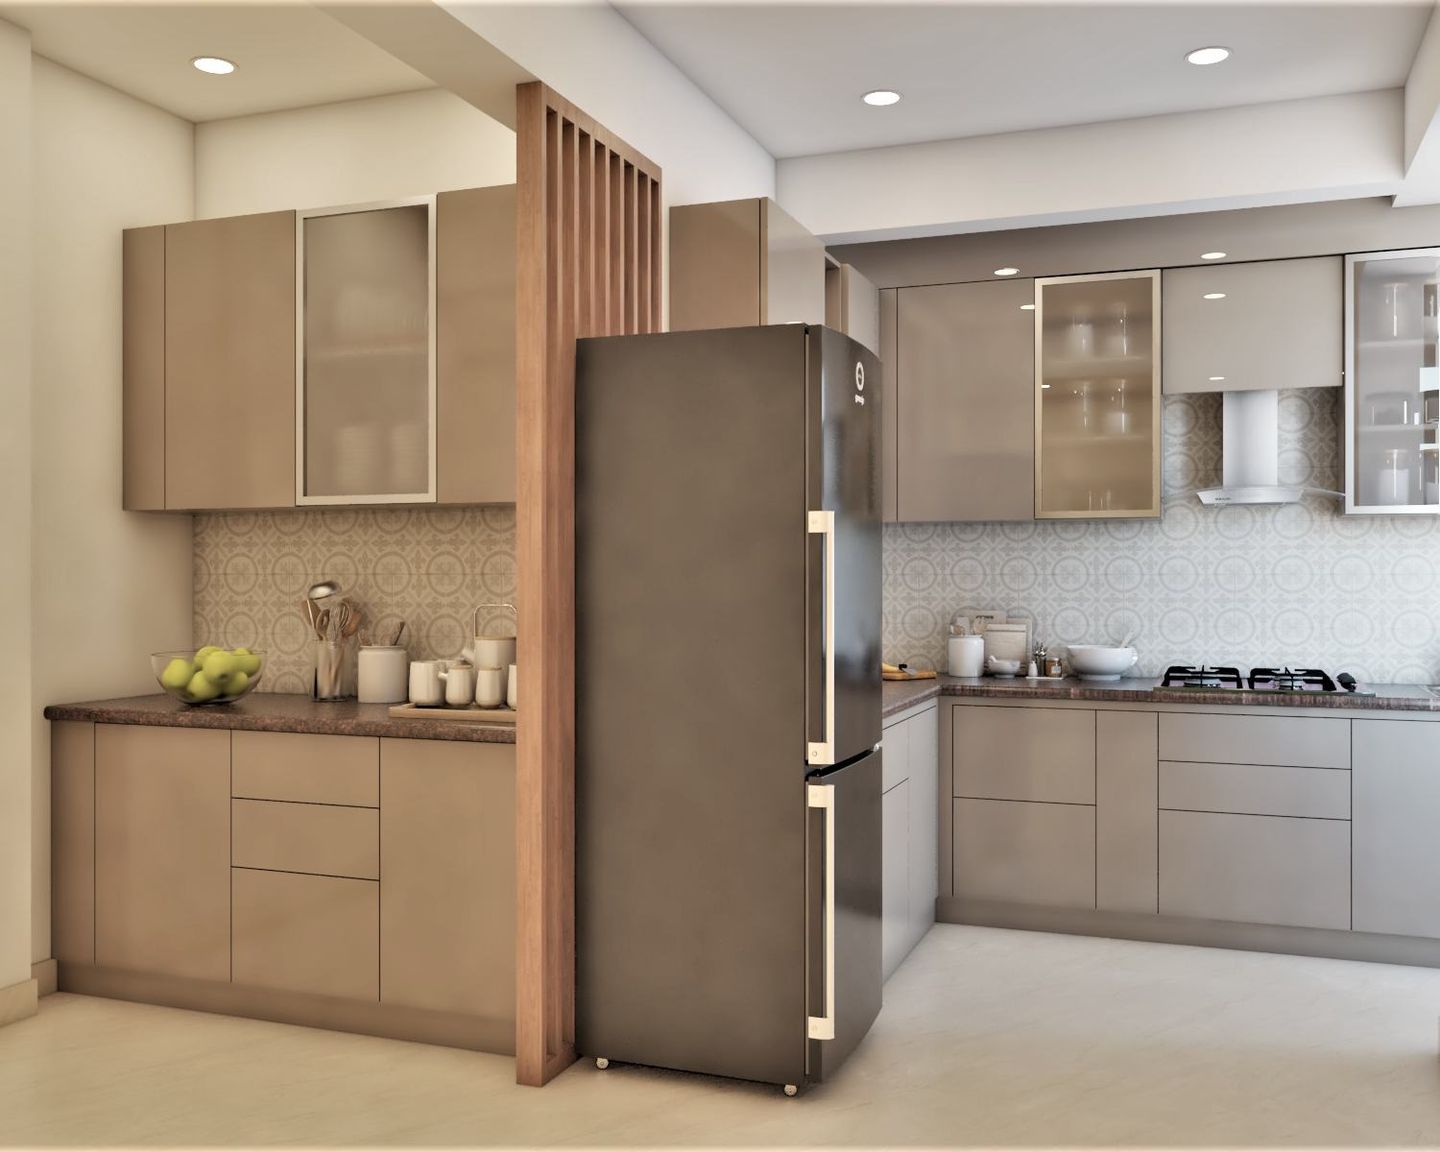 Modern L-Shaped Modular Kitchen Design With Beige And White Patterned Dado